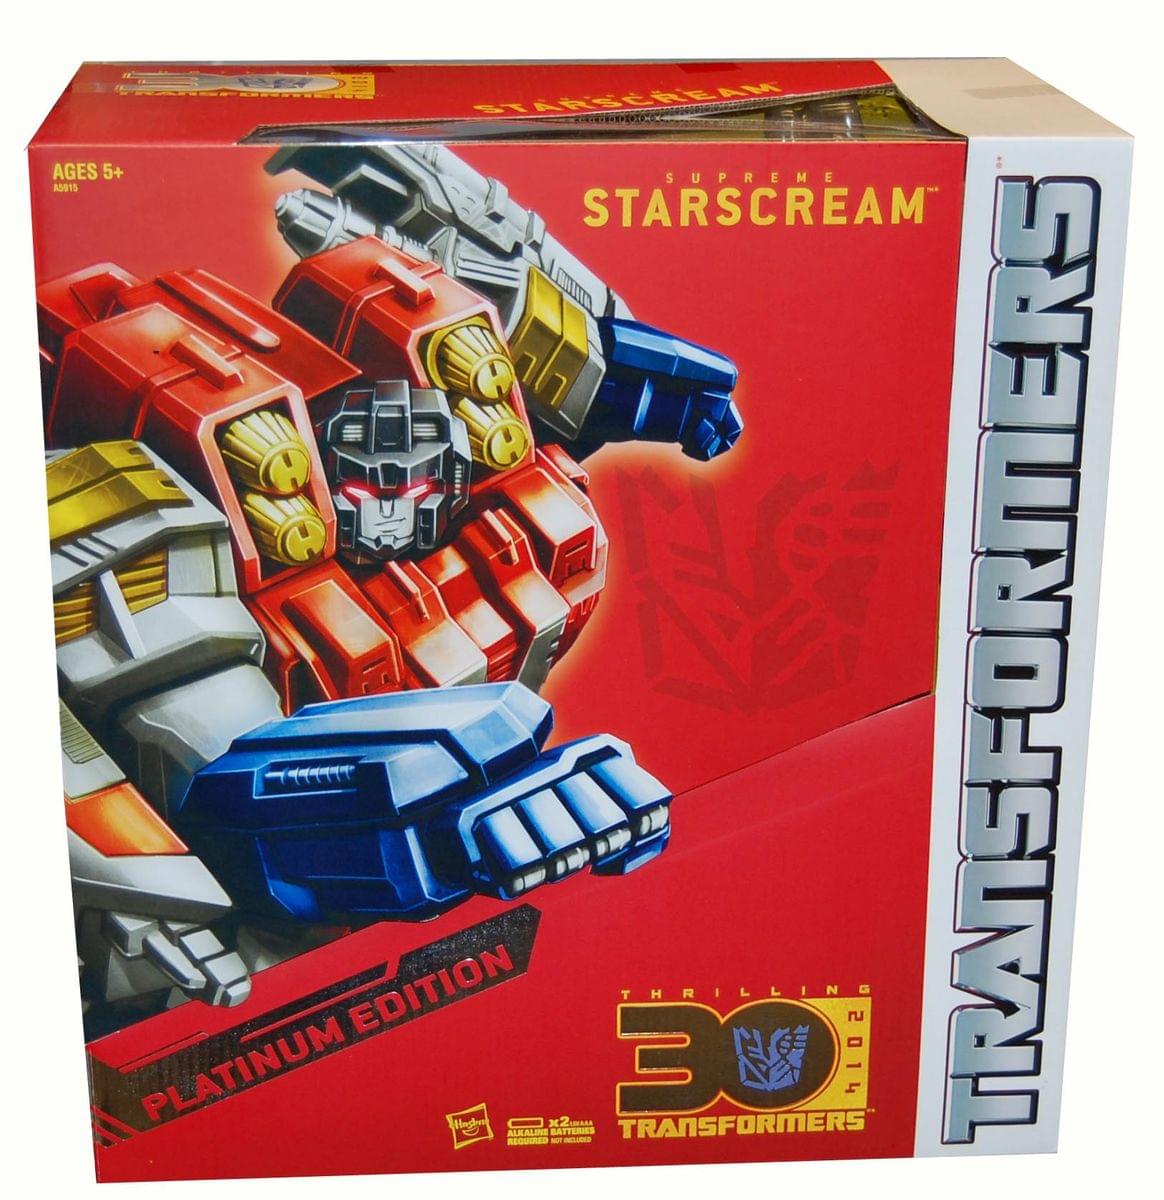 Transformers Platinum Edition Cny Year Of The Horse Starscream Action Figure